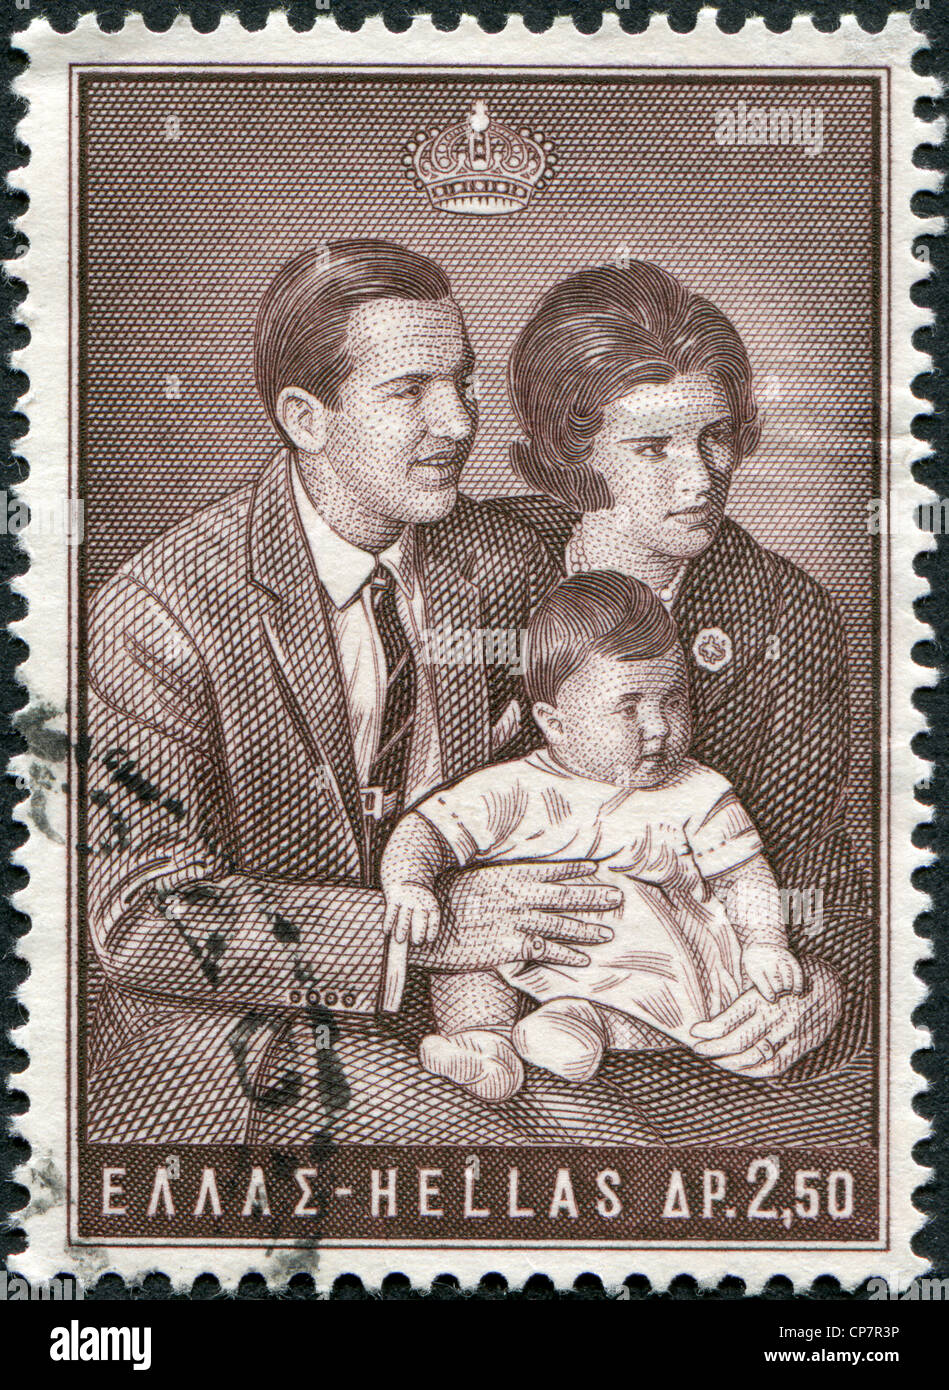 Postage stamps printed in Greece, shows King Constantine II, Queen Anne-Marie and Princess Alexia, circa 1966 Stock Photo